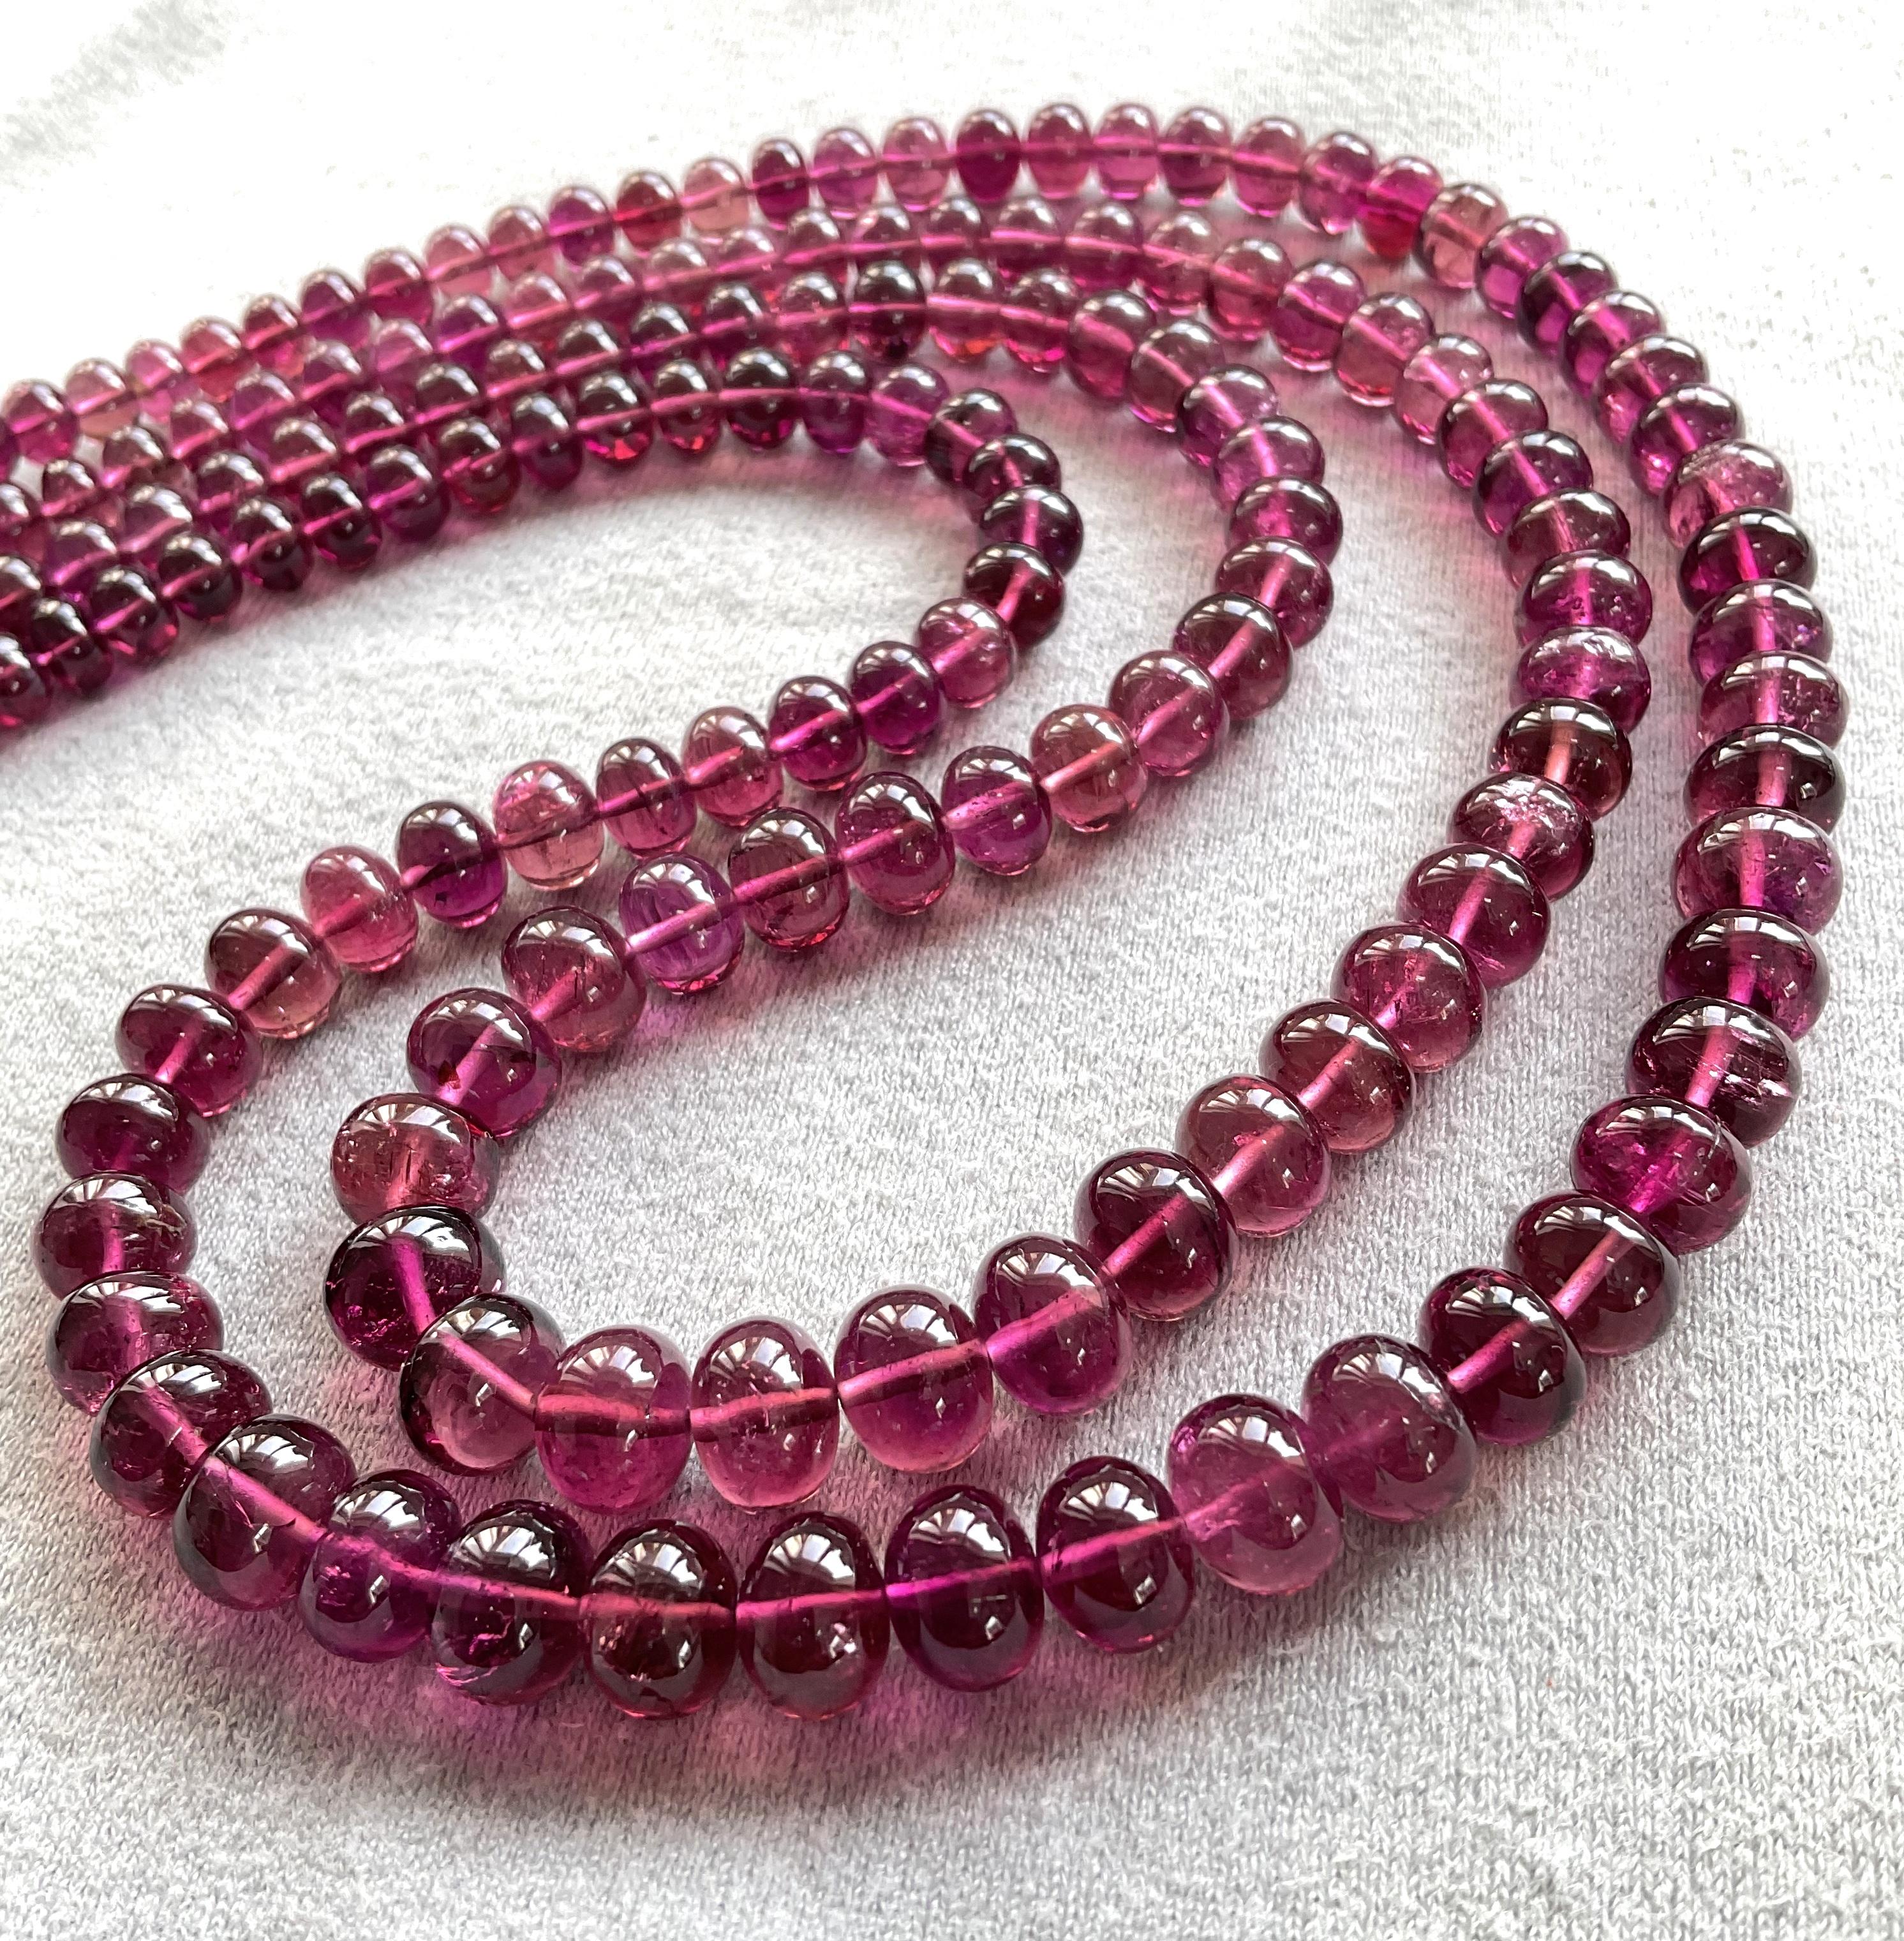 431.00 Carats Rubellite Tourmaline Plain Beads For Top Fine Jewelry Natural Gem For Sale 2